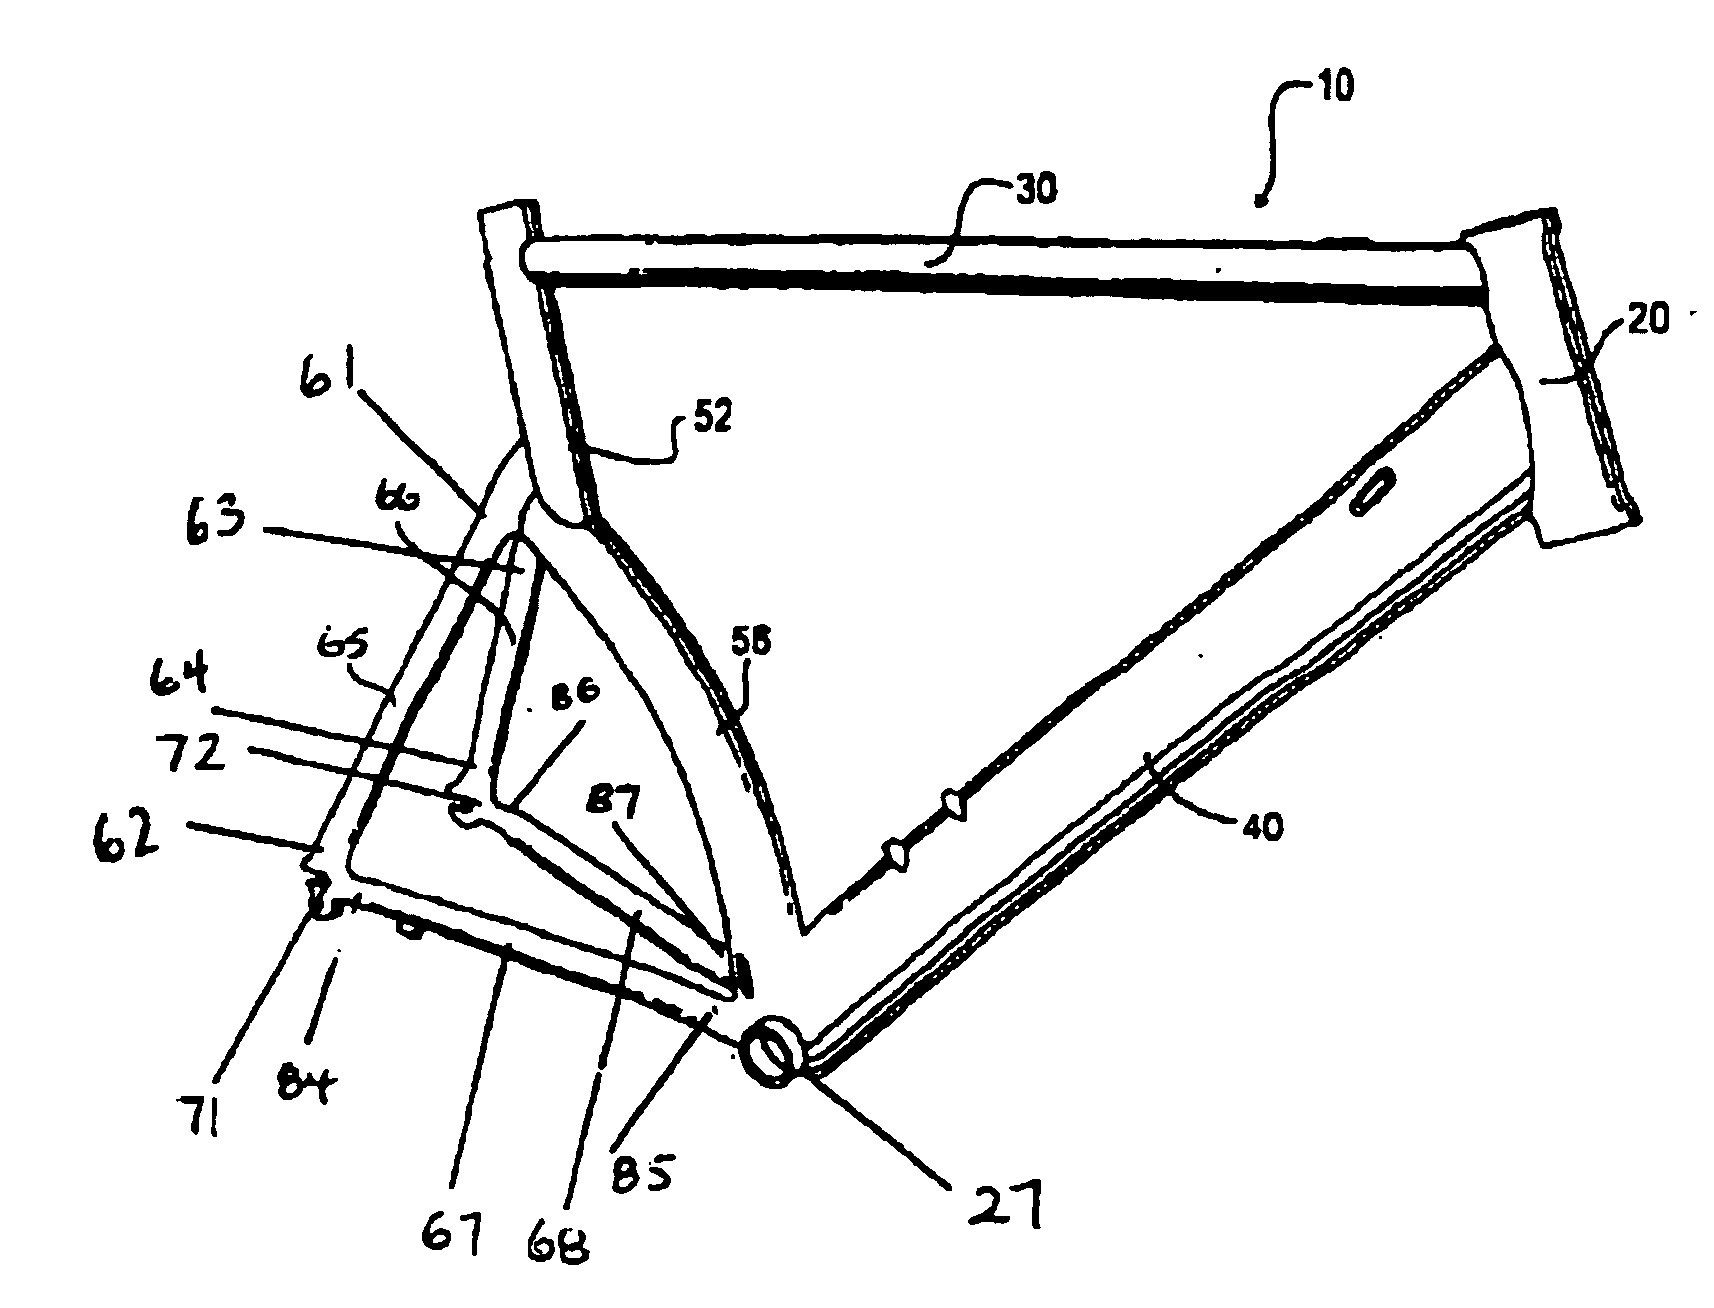 Reinforced bicycle frame